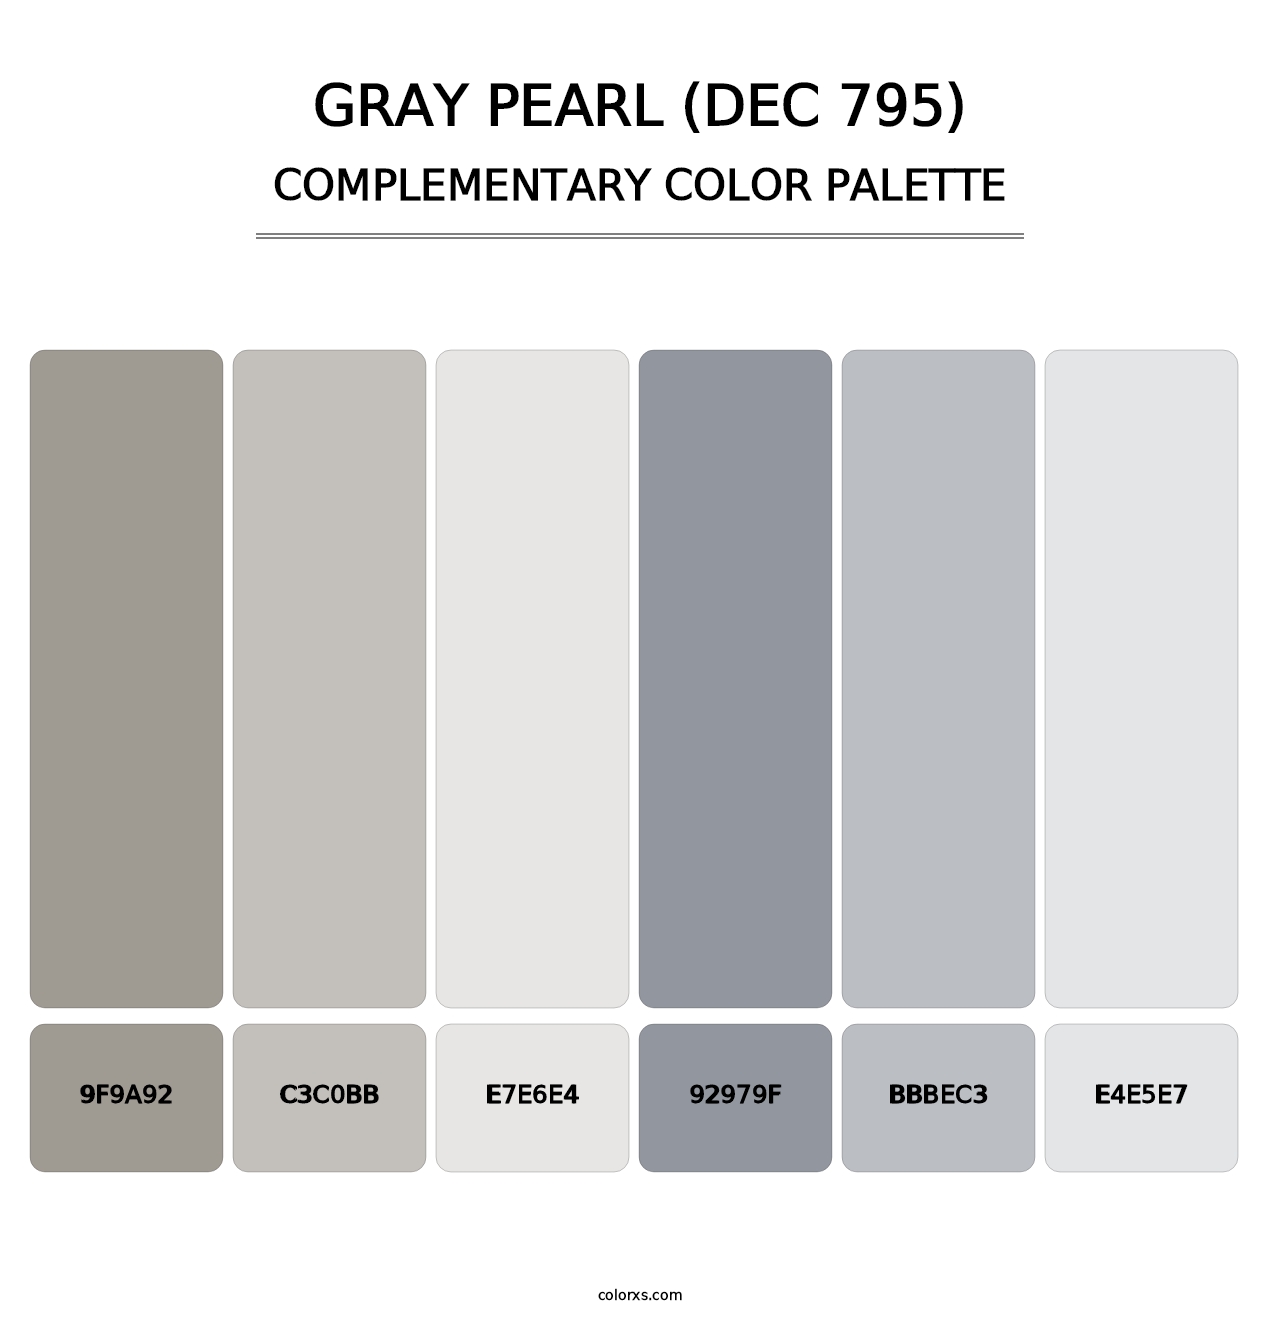 Gray Pearl (DEC 795) - Complementary Color Palette